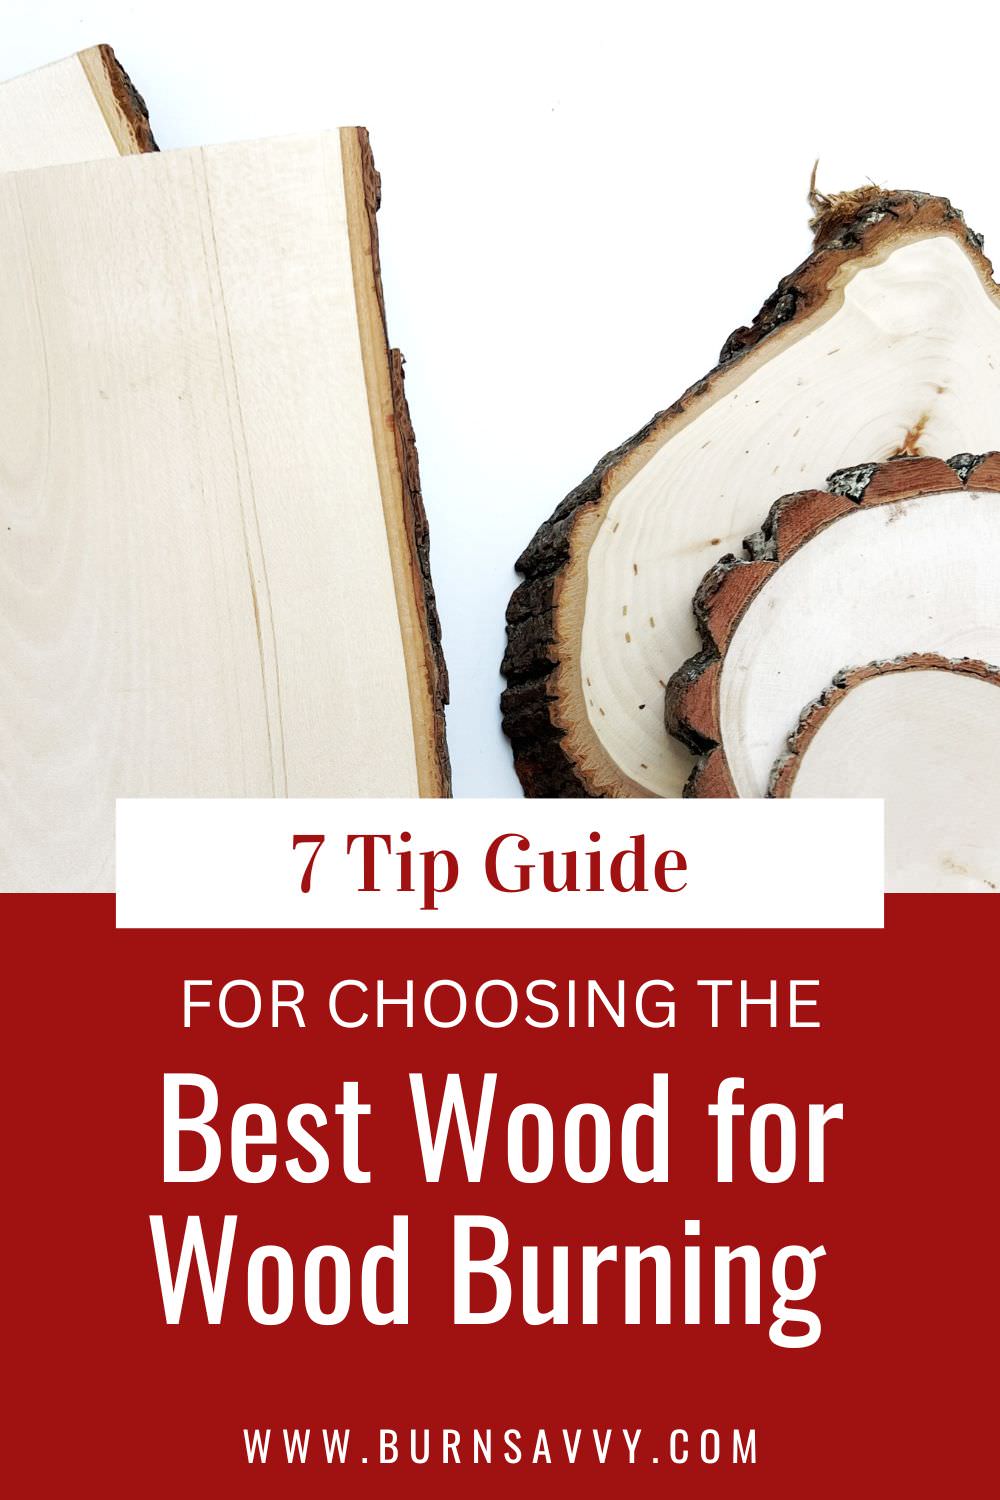 Best wood for woodburning guide Pinterest image